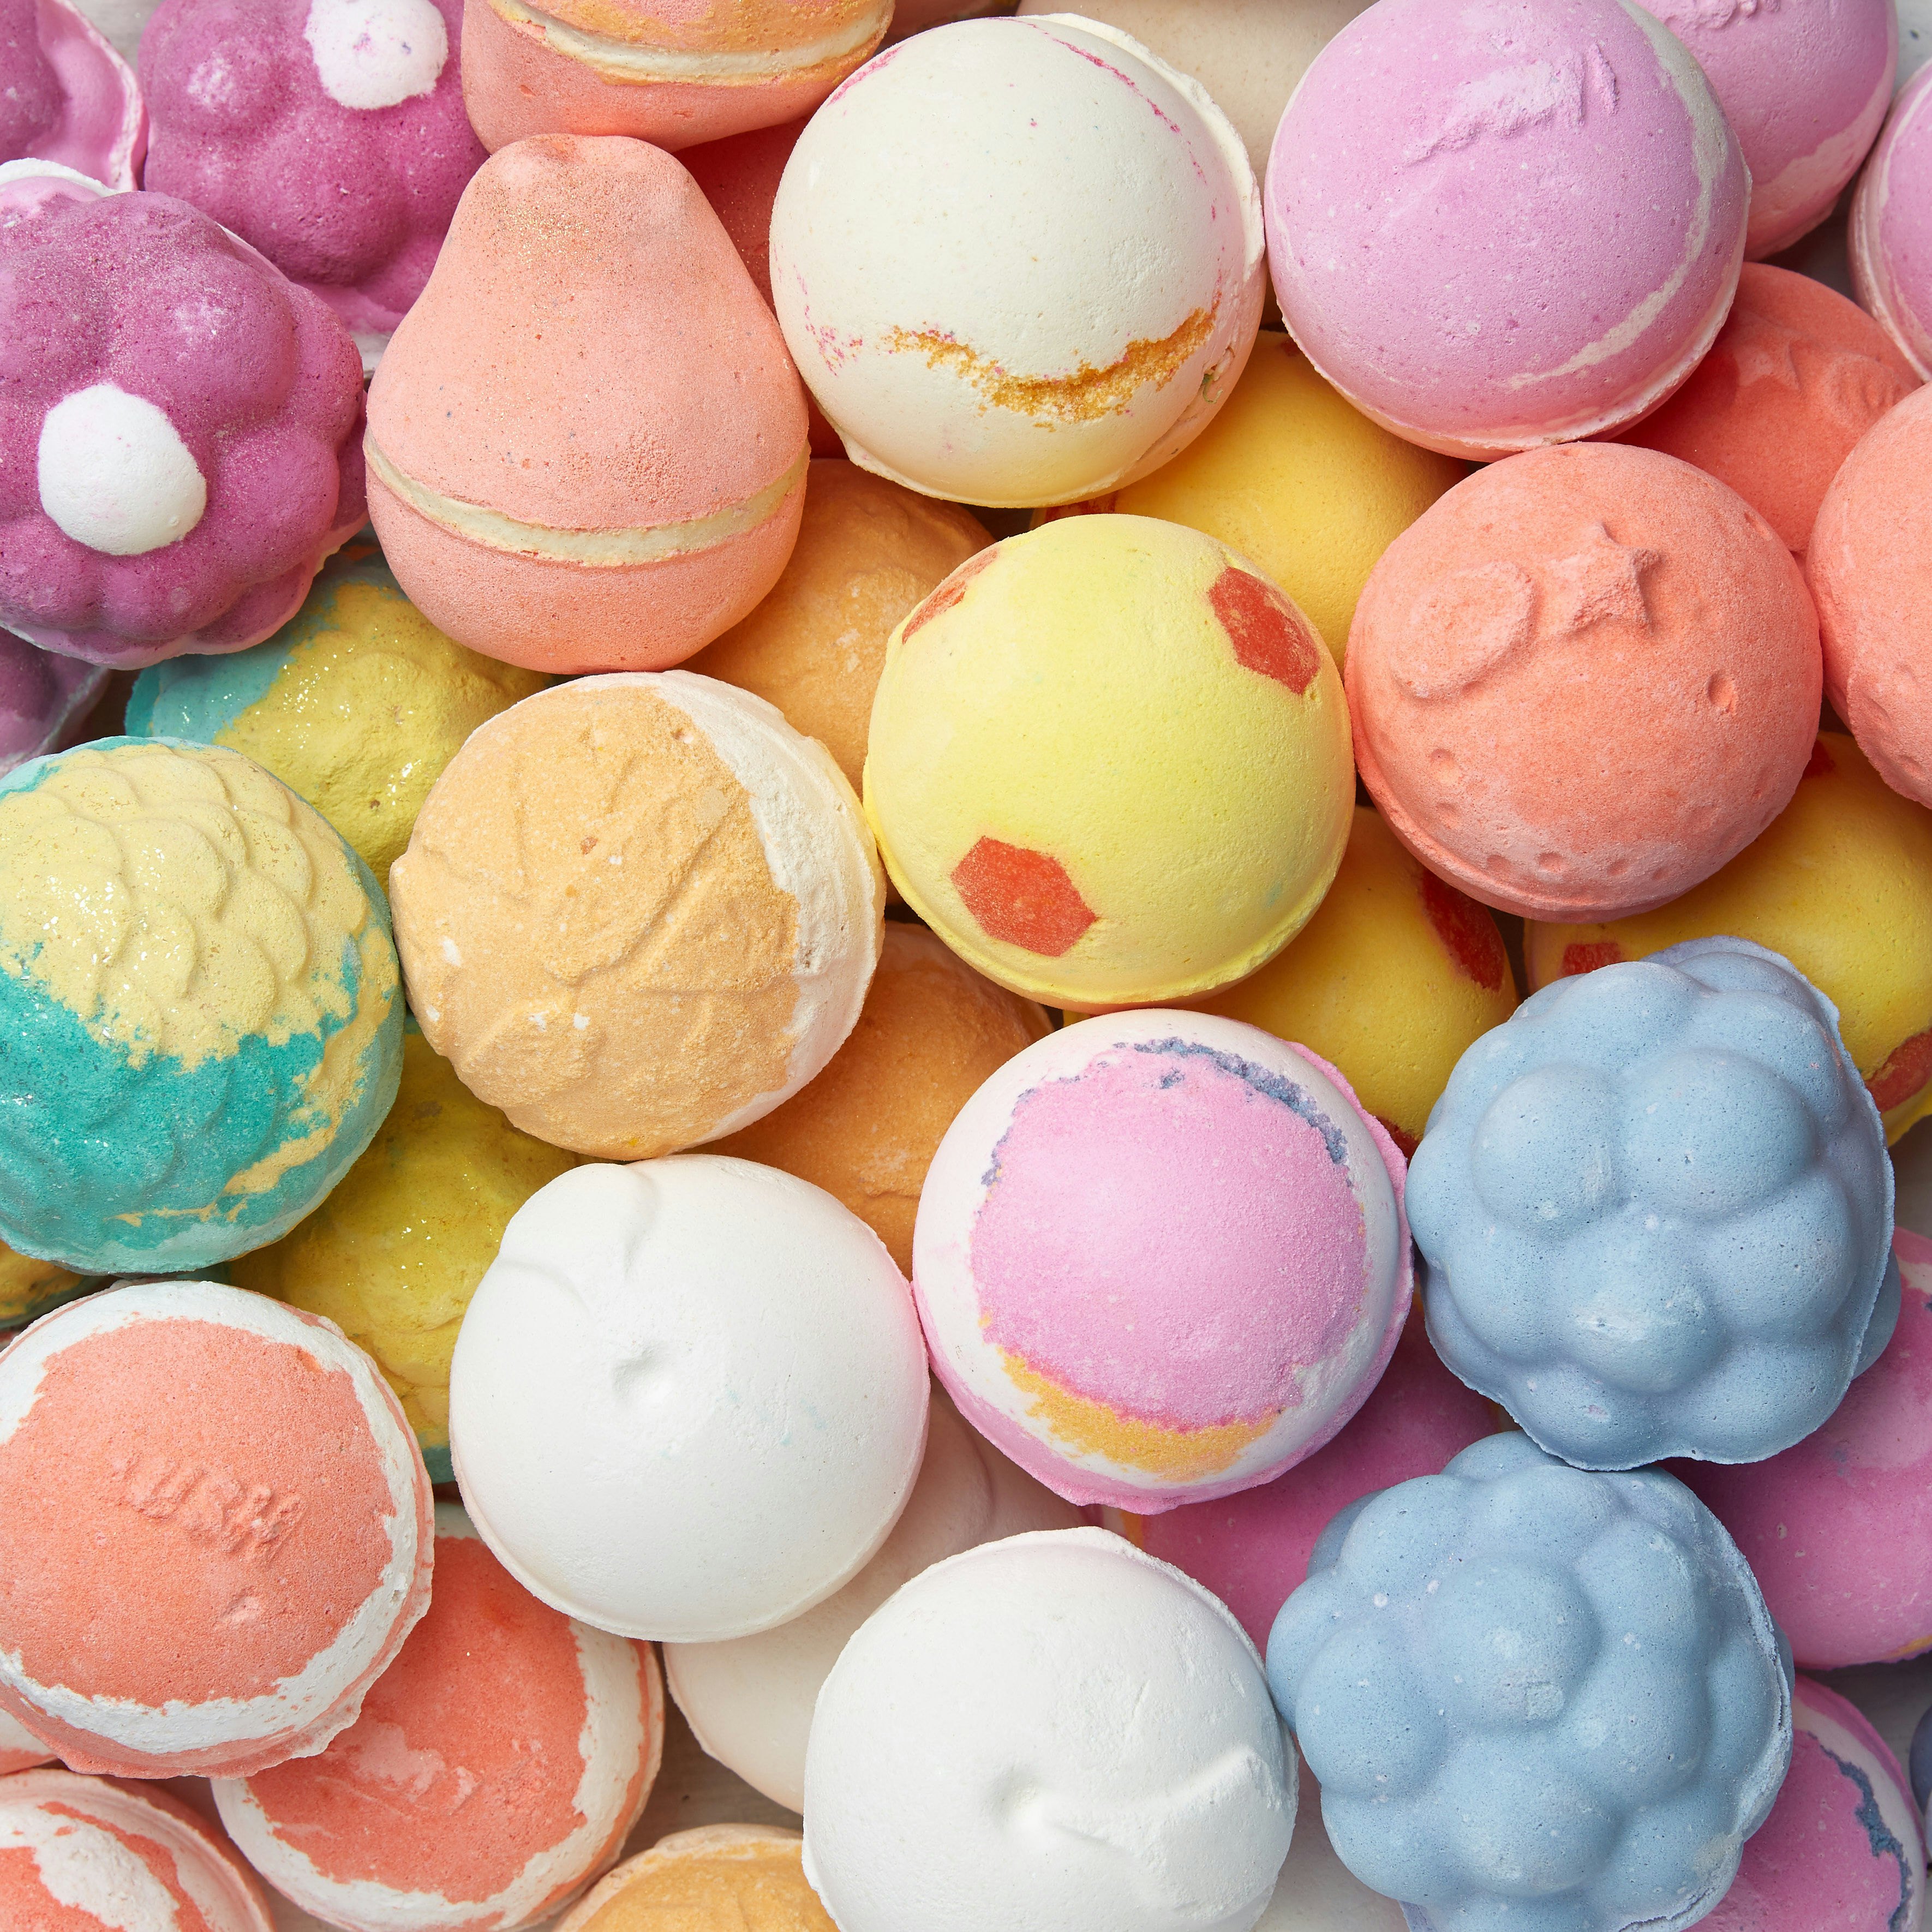 Lush Is Dropping 12 New Bath Bombs In Scents Fans Voted To Bring Back